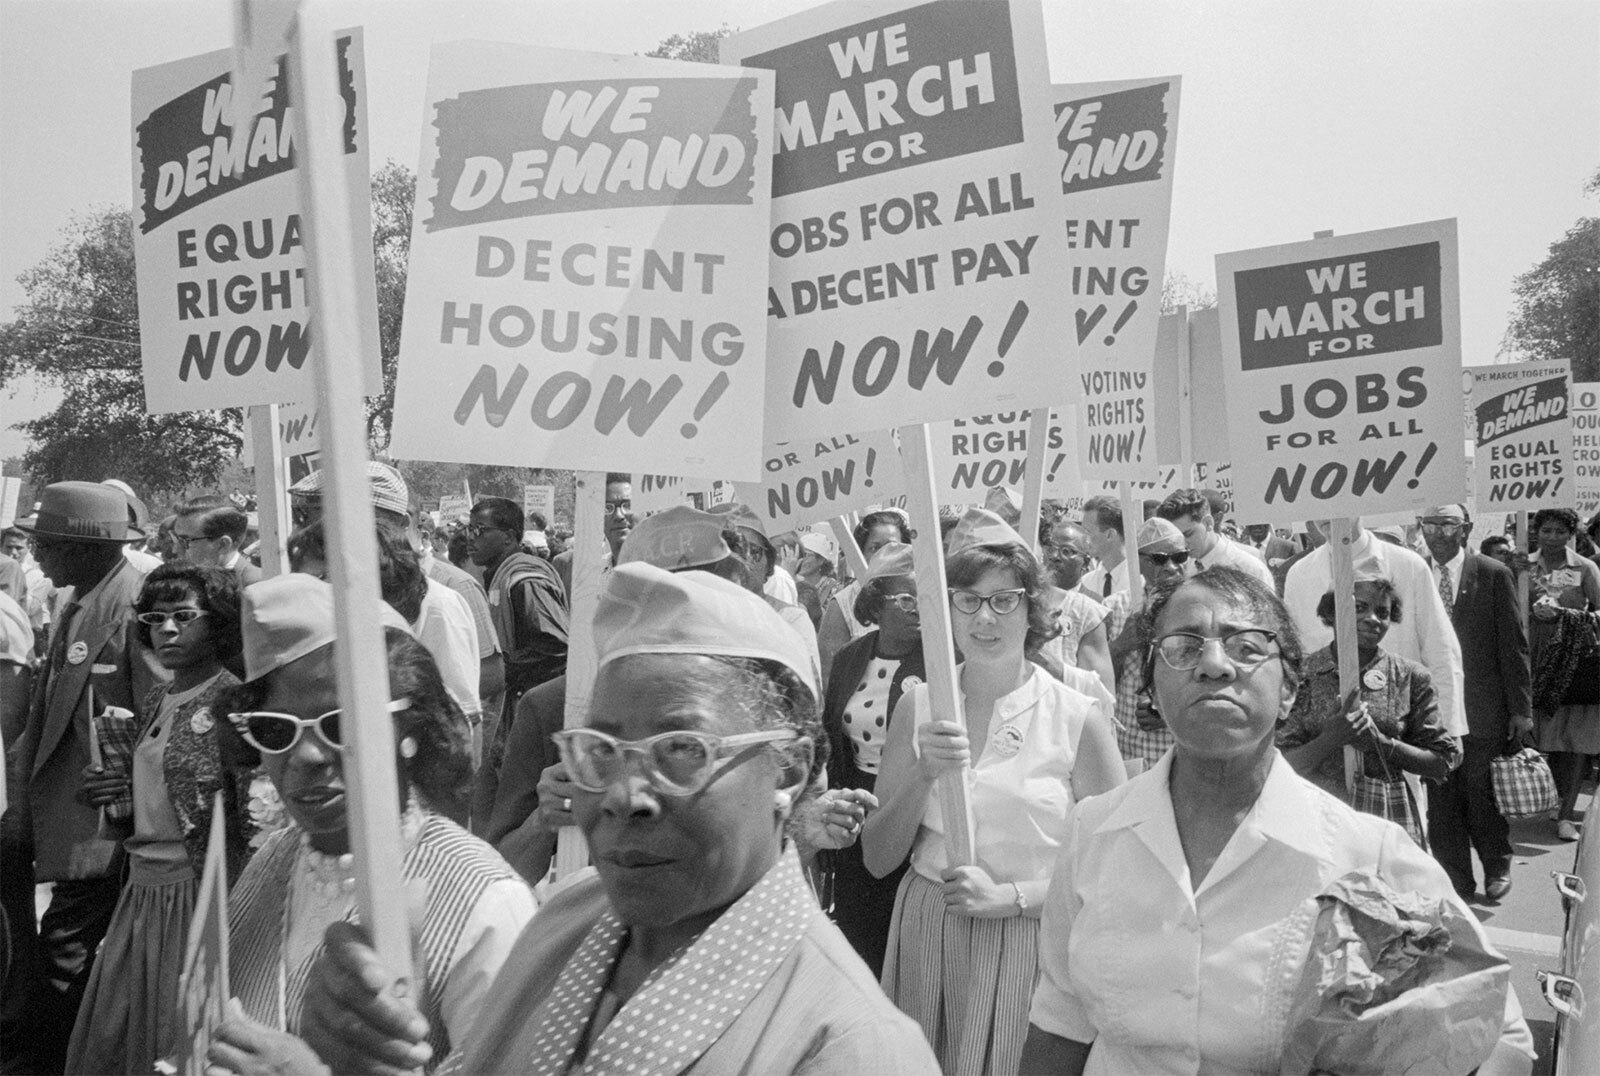 This image depicts a 1963 photograph of Black resistance to Jim Crow laws at The March on Washington on August 28, 1963.